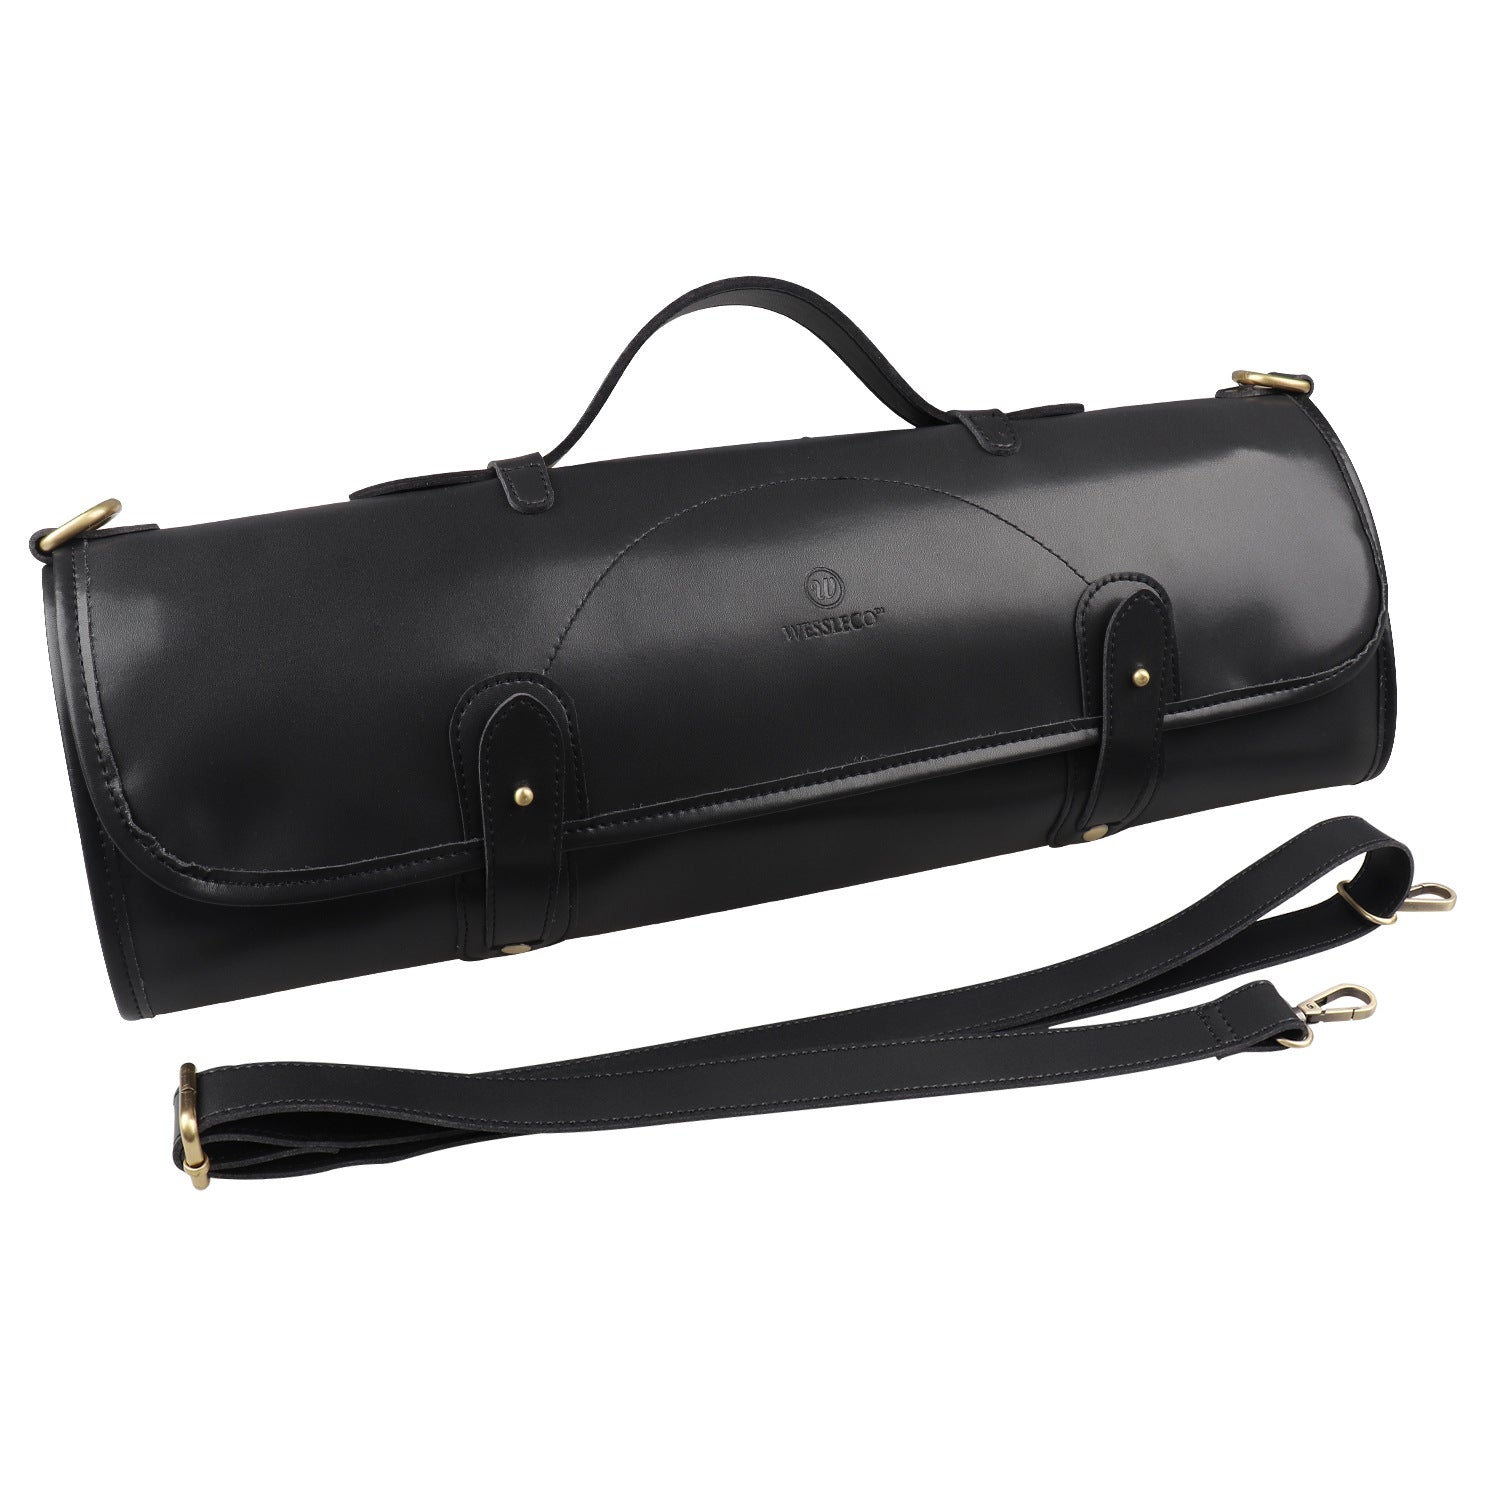 Gennine Leather Chef's Knife Roll Up Storage Bag-Leather Cases-Black-Free Shipping Leatheretro